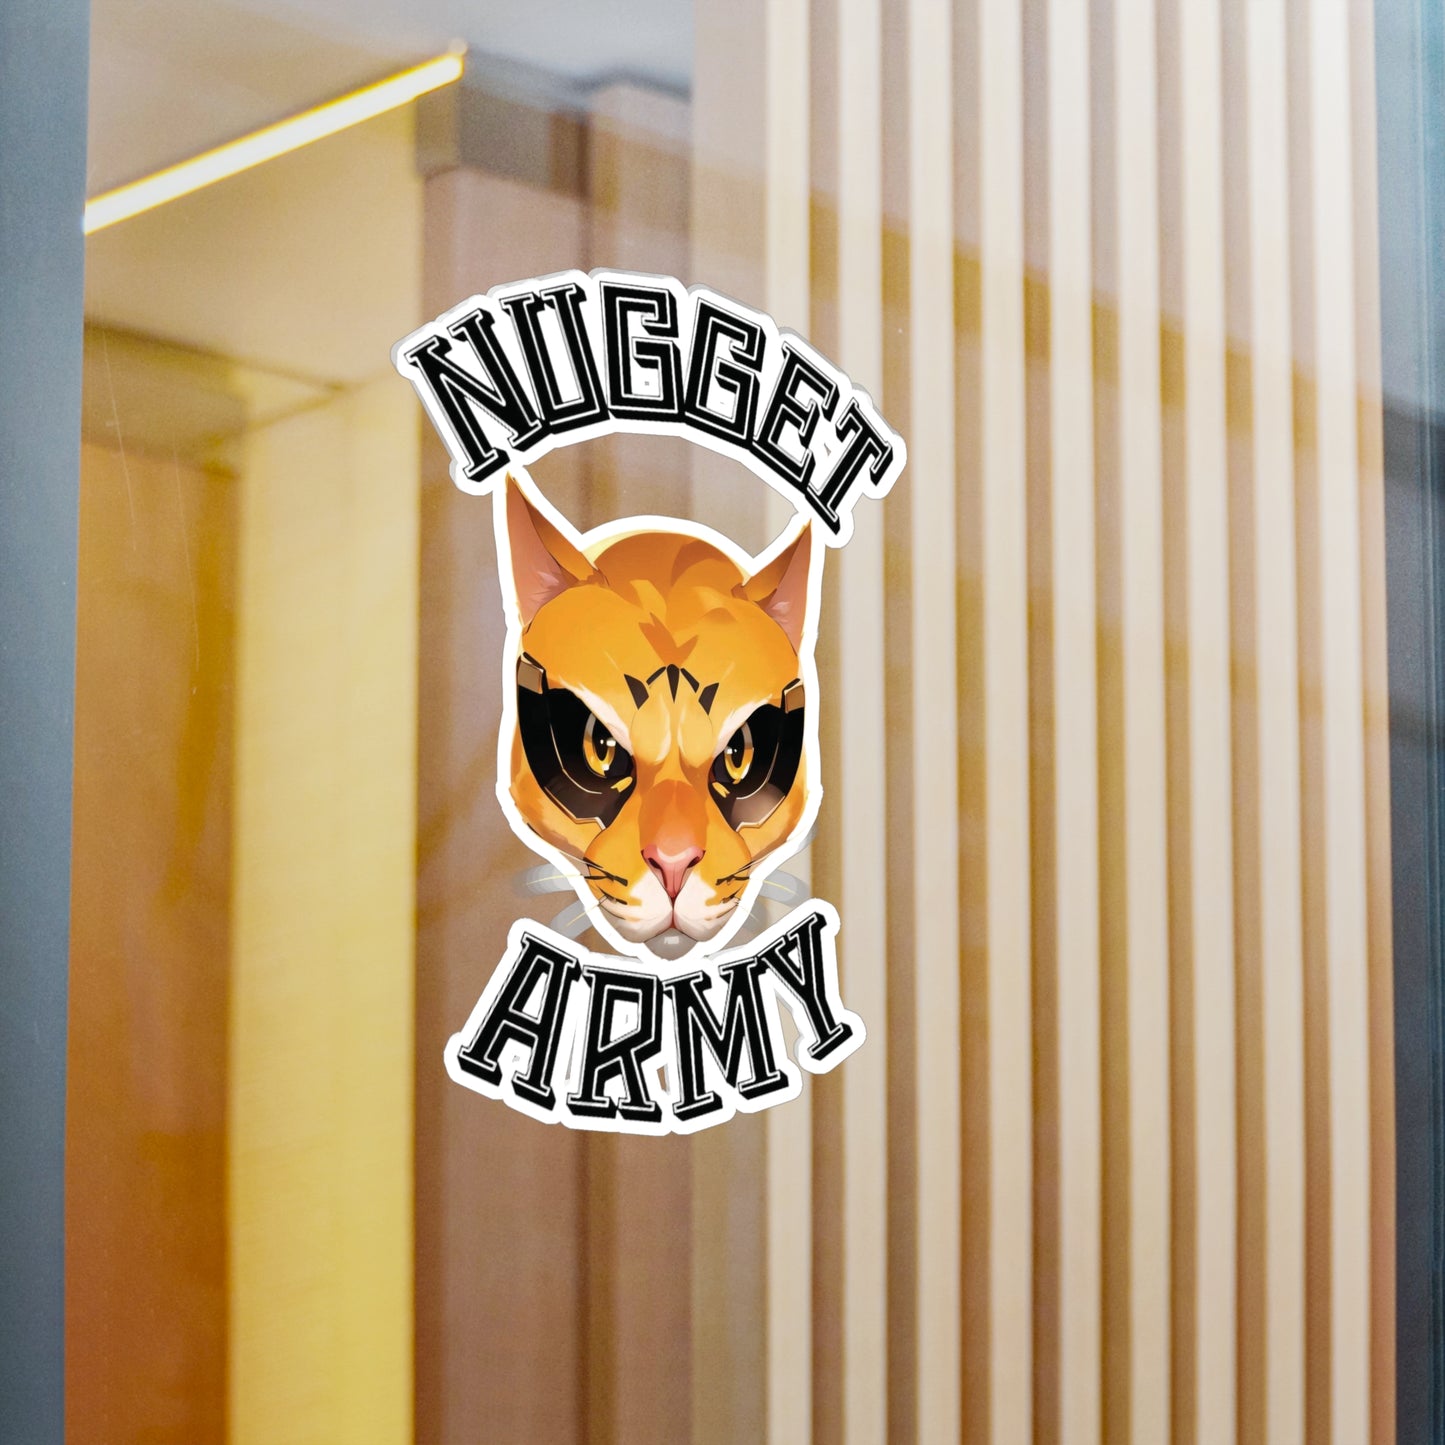 Stand out  with the  Nugget Army  available at Hey Nugget. Grab yours today!